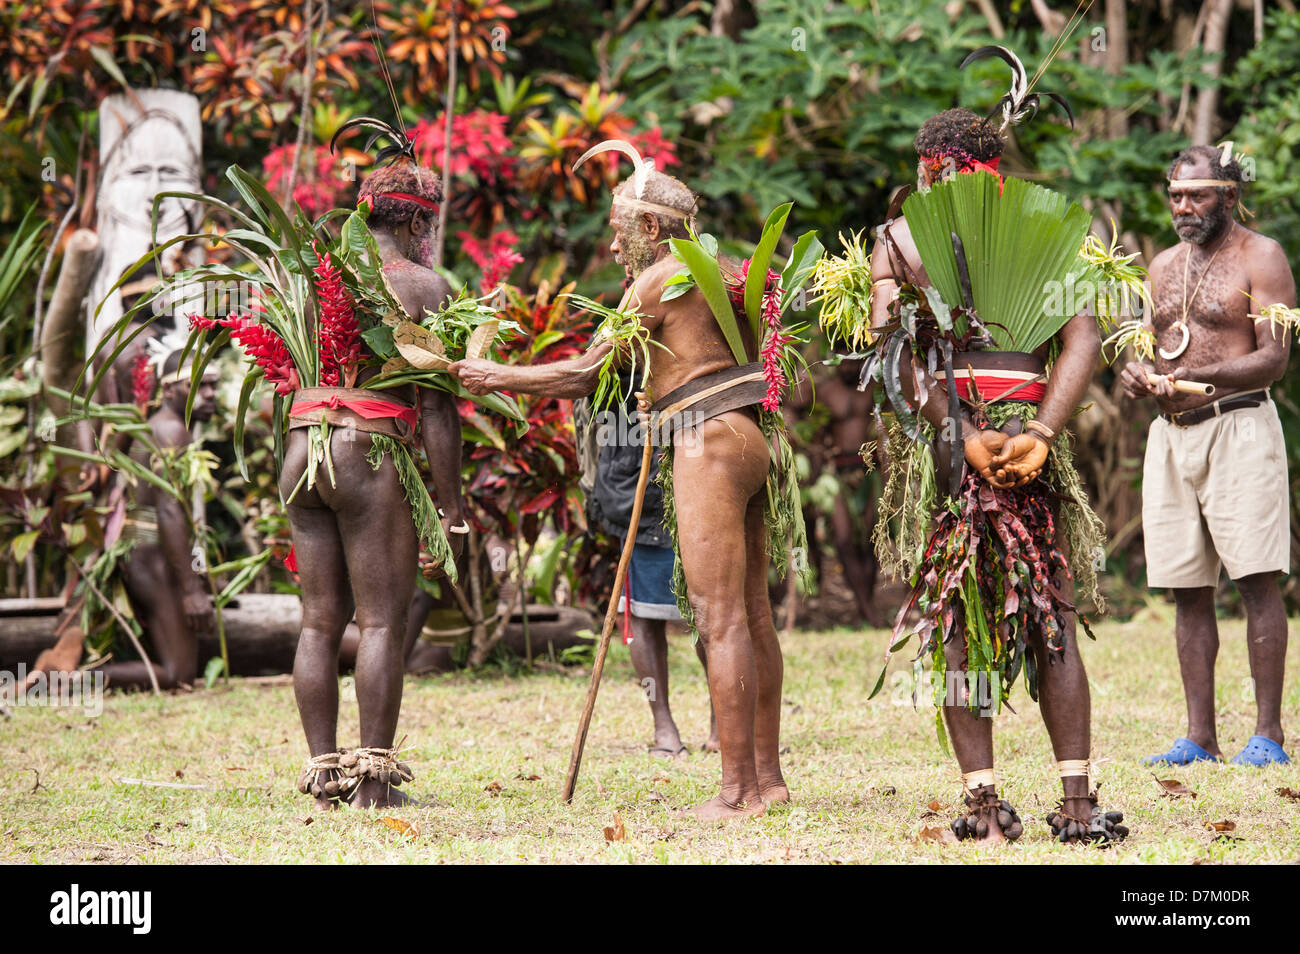 An ordination ceremony for a new village chief and his deputy, part of a festival of traditional culture, Labo village, Vanuatu Stock Photo